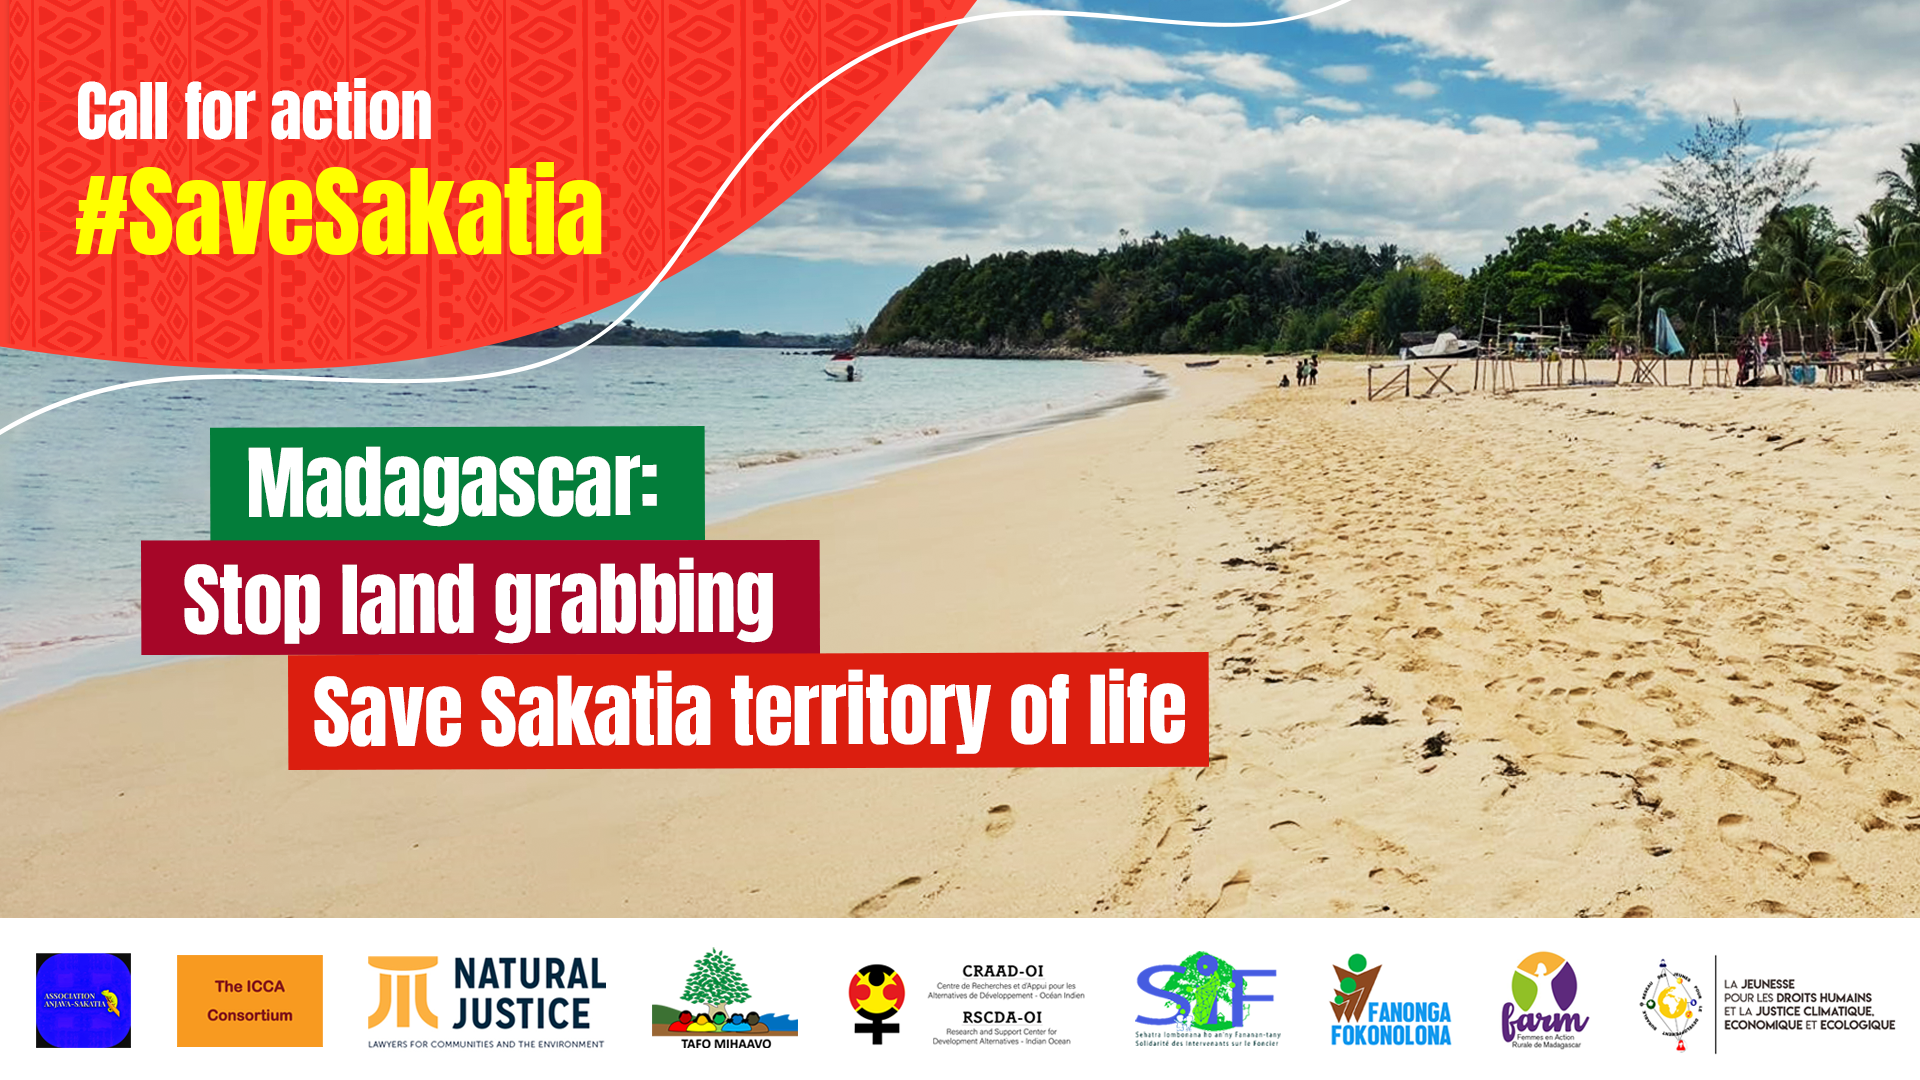 Call for Action: Save the ICCA–territory of life of Sakatia in Madagascar against land grabbing